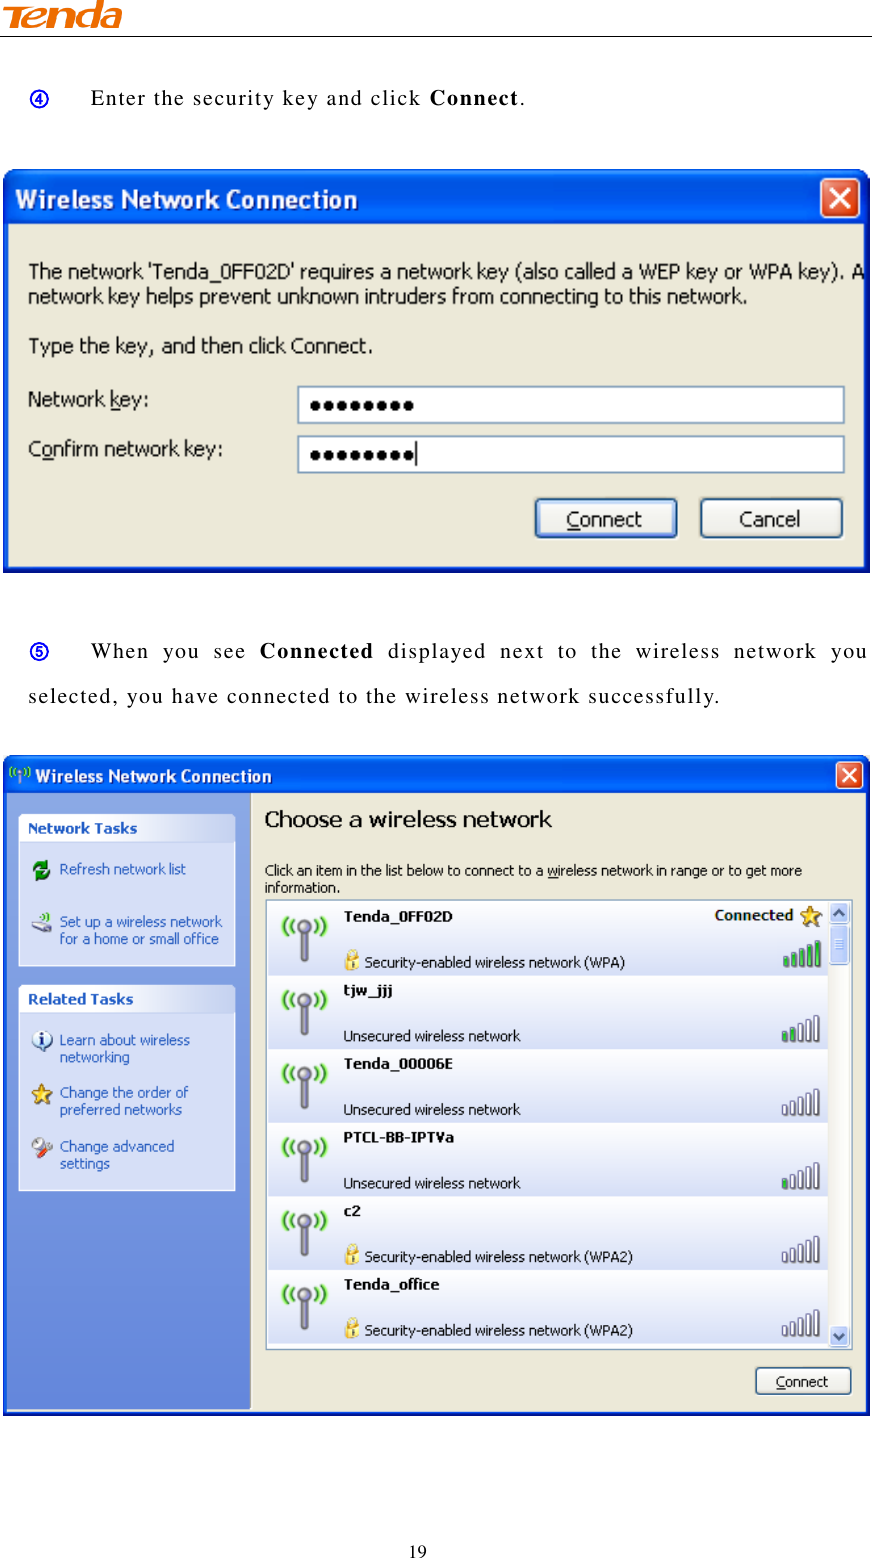                                     19 ④ Enter the security key and click Connect.    ⑤ When  you  see  Connected  displayed  next  to  the  wireless  network  you selected, you have connected to the wireless network successfully.   